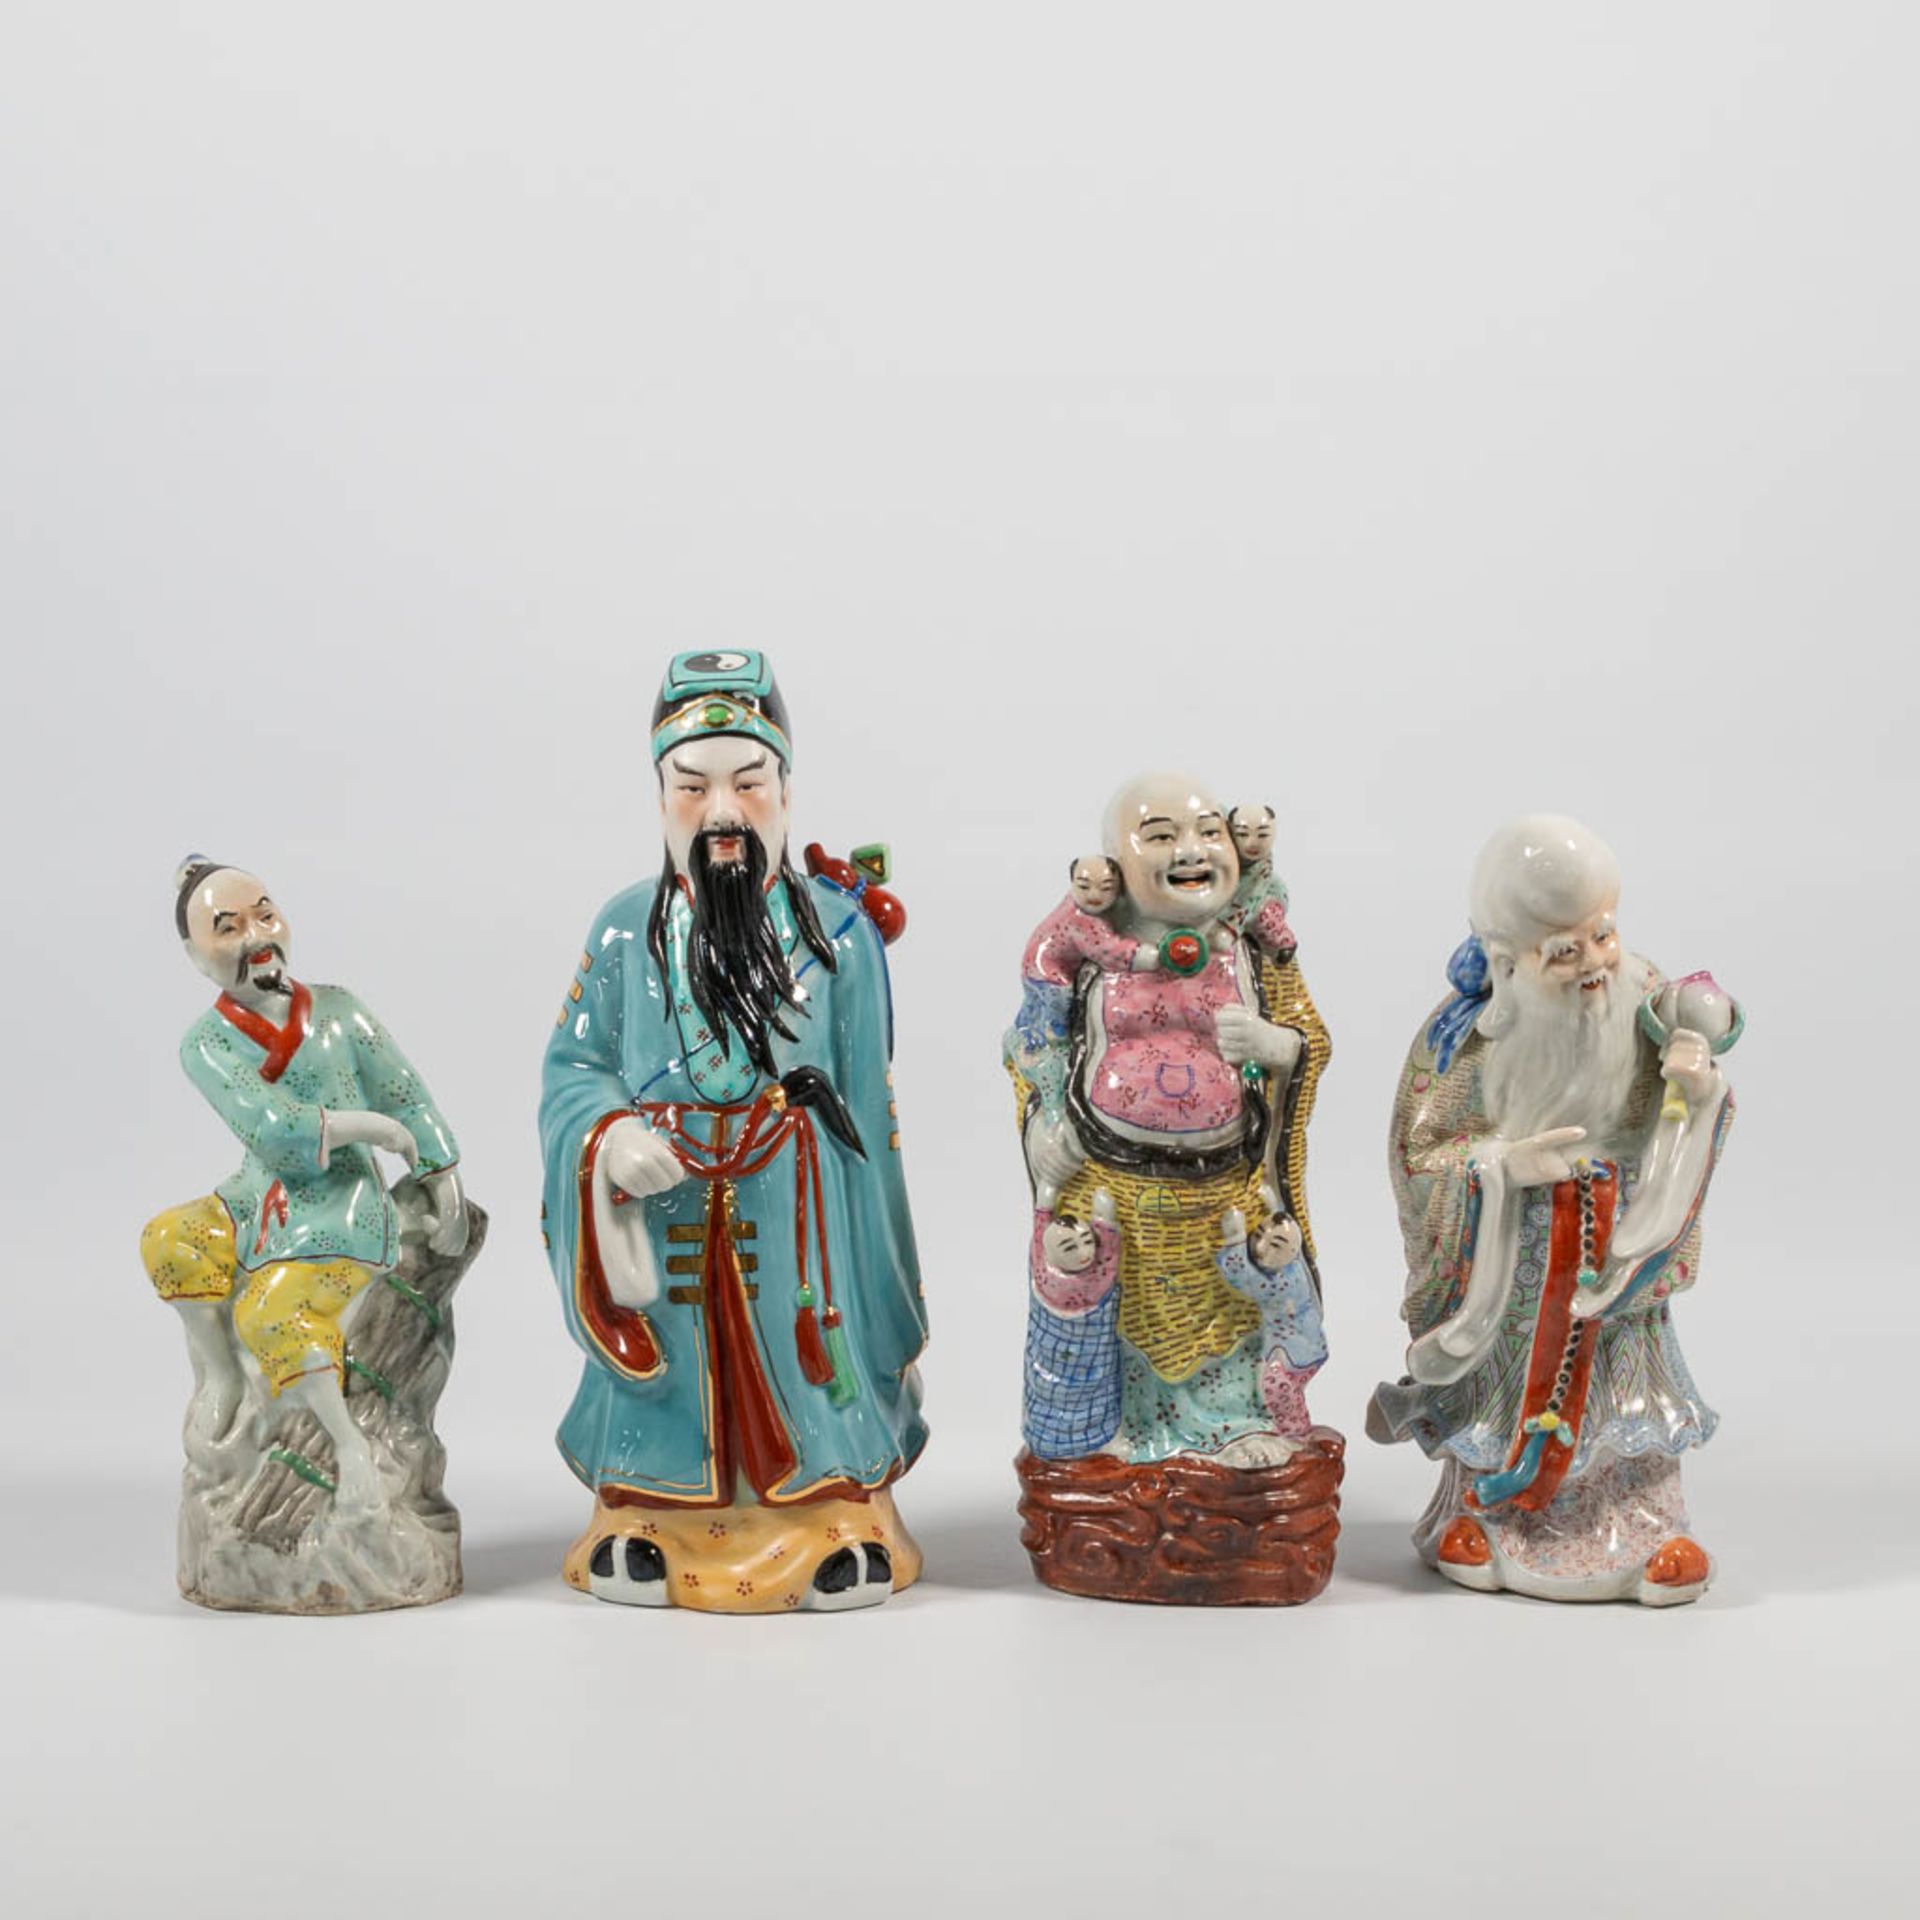 A Collection of 4 Chinese immortal figurines, made of porcelain.